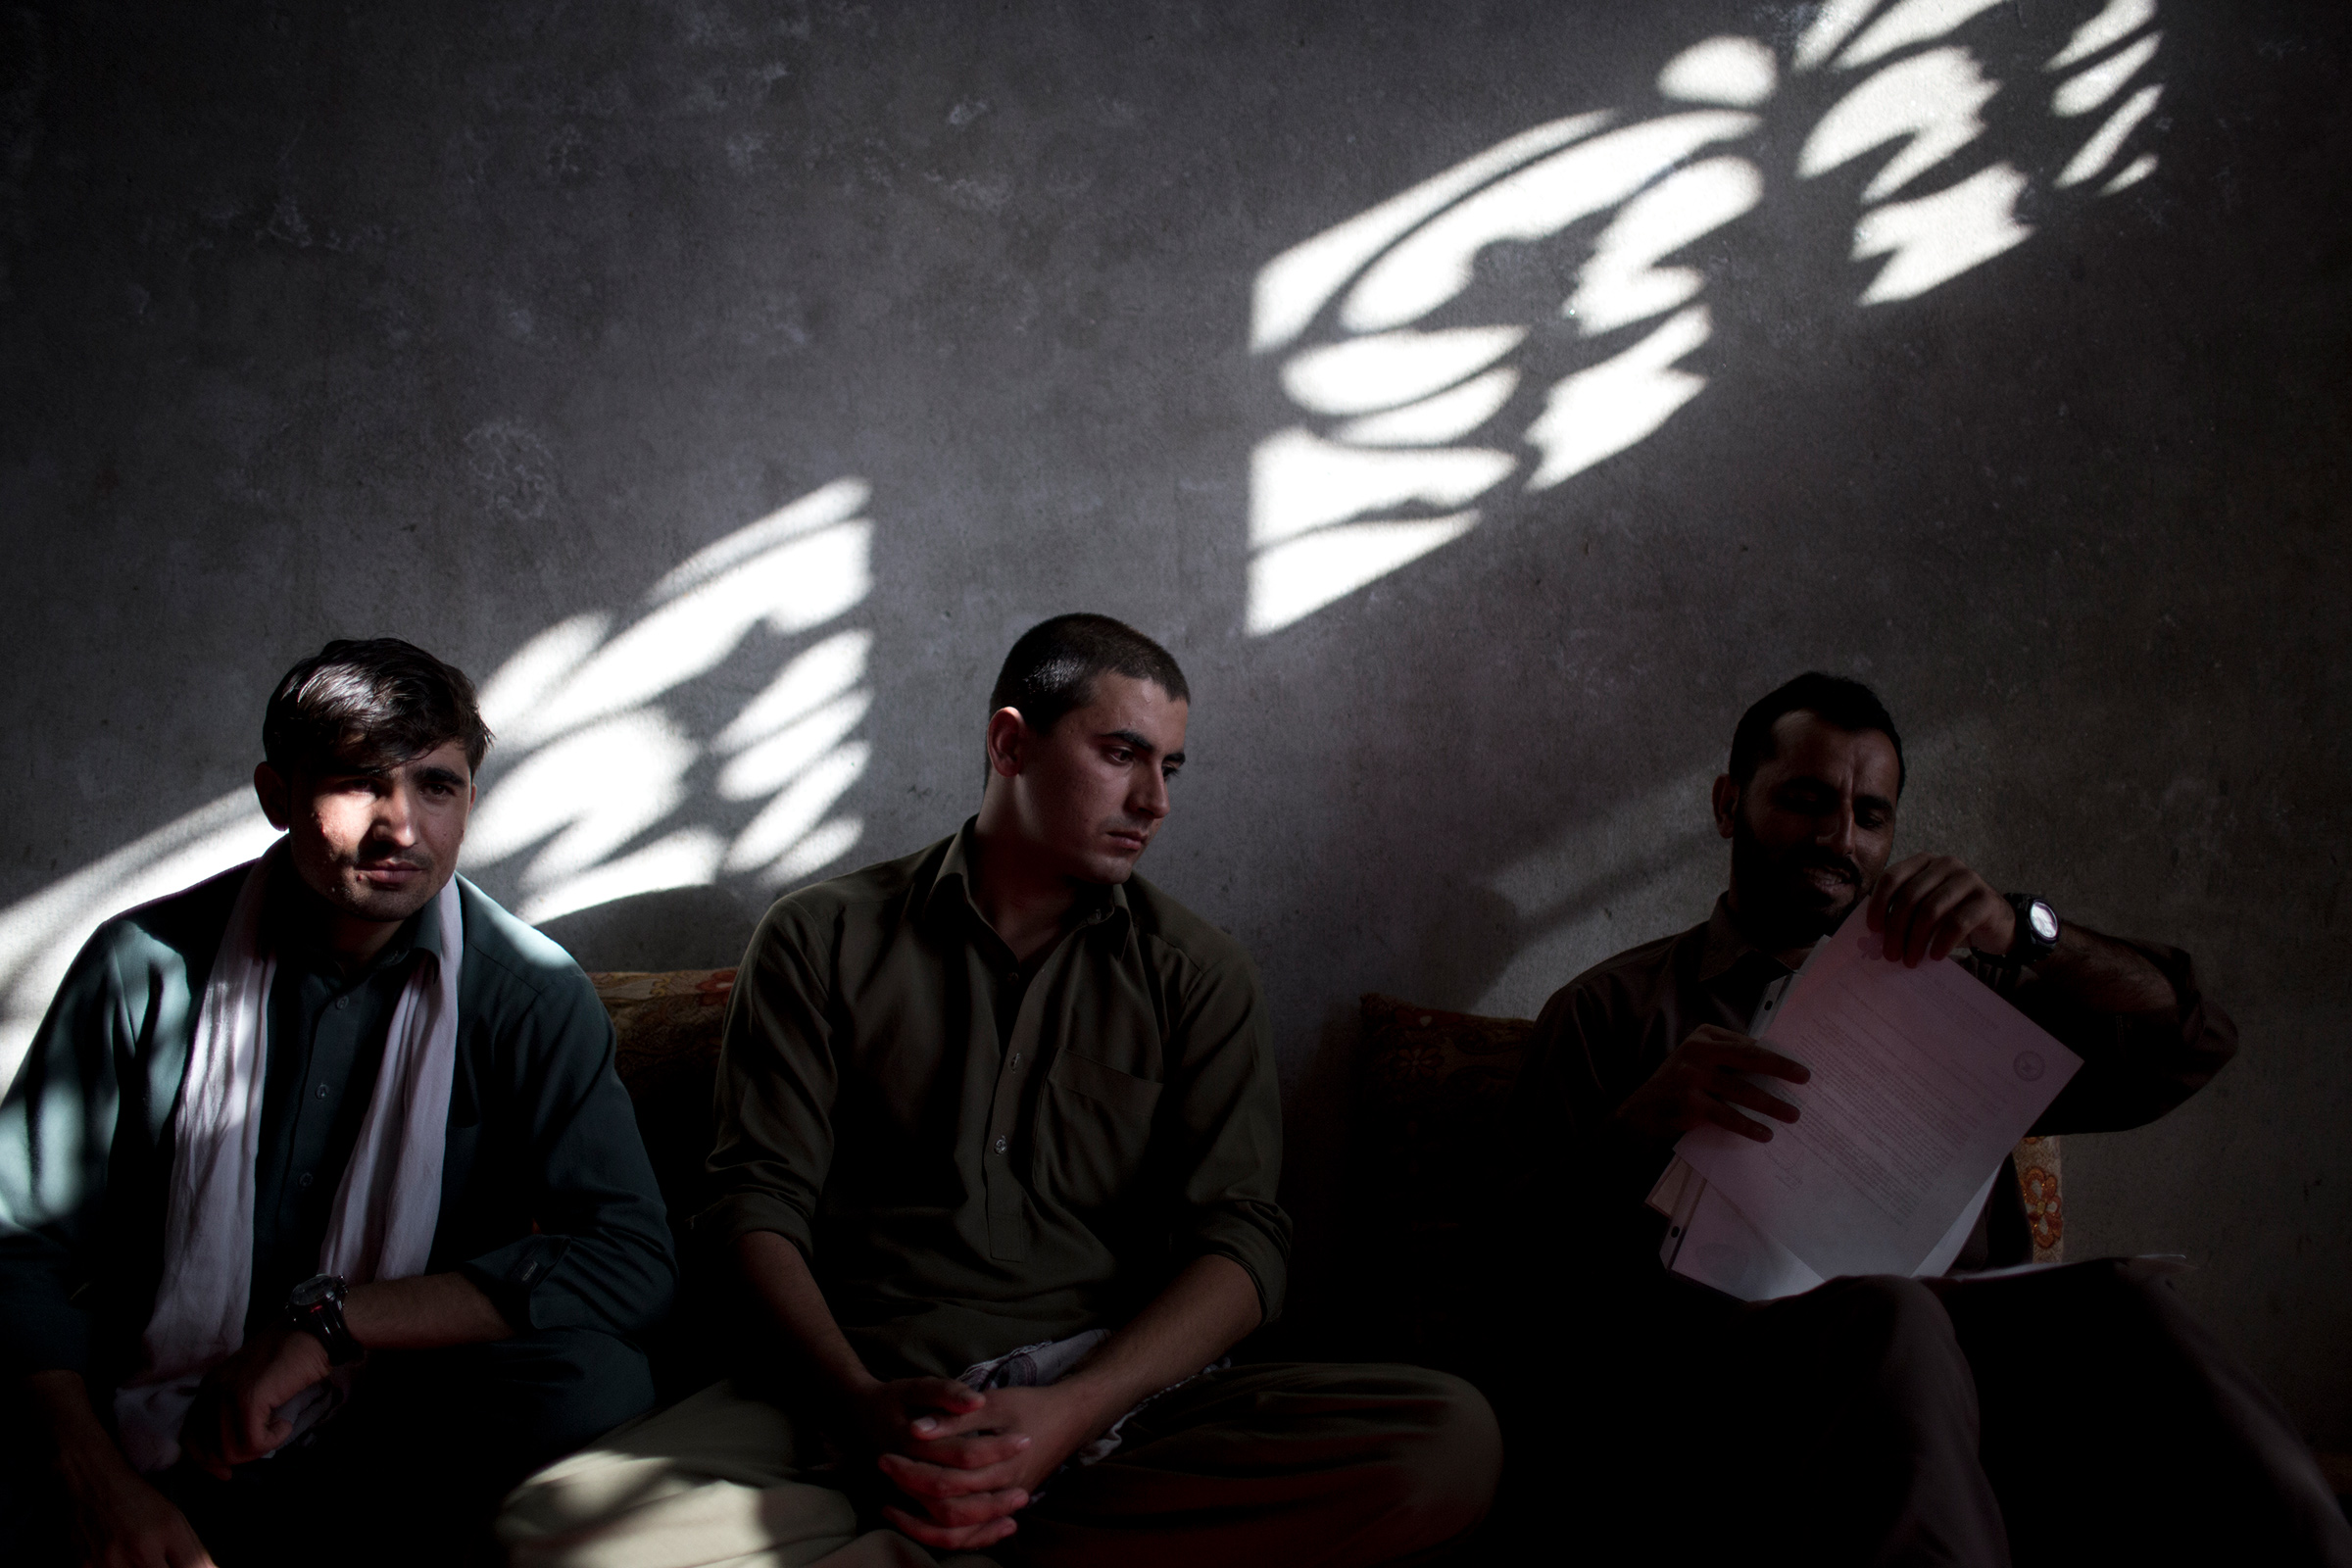 Interpreters, from left, Afiqullah, Irshadullah and Said Hussein, all working for the U.S. army, meet in Jalalabad, Afghanistan, on Oct. 20, 2012. They applied for a U.S. visa through the Afghan SIV program. (Mikhail Galustov—The Washington Post/Getty Images)